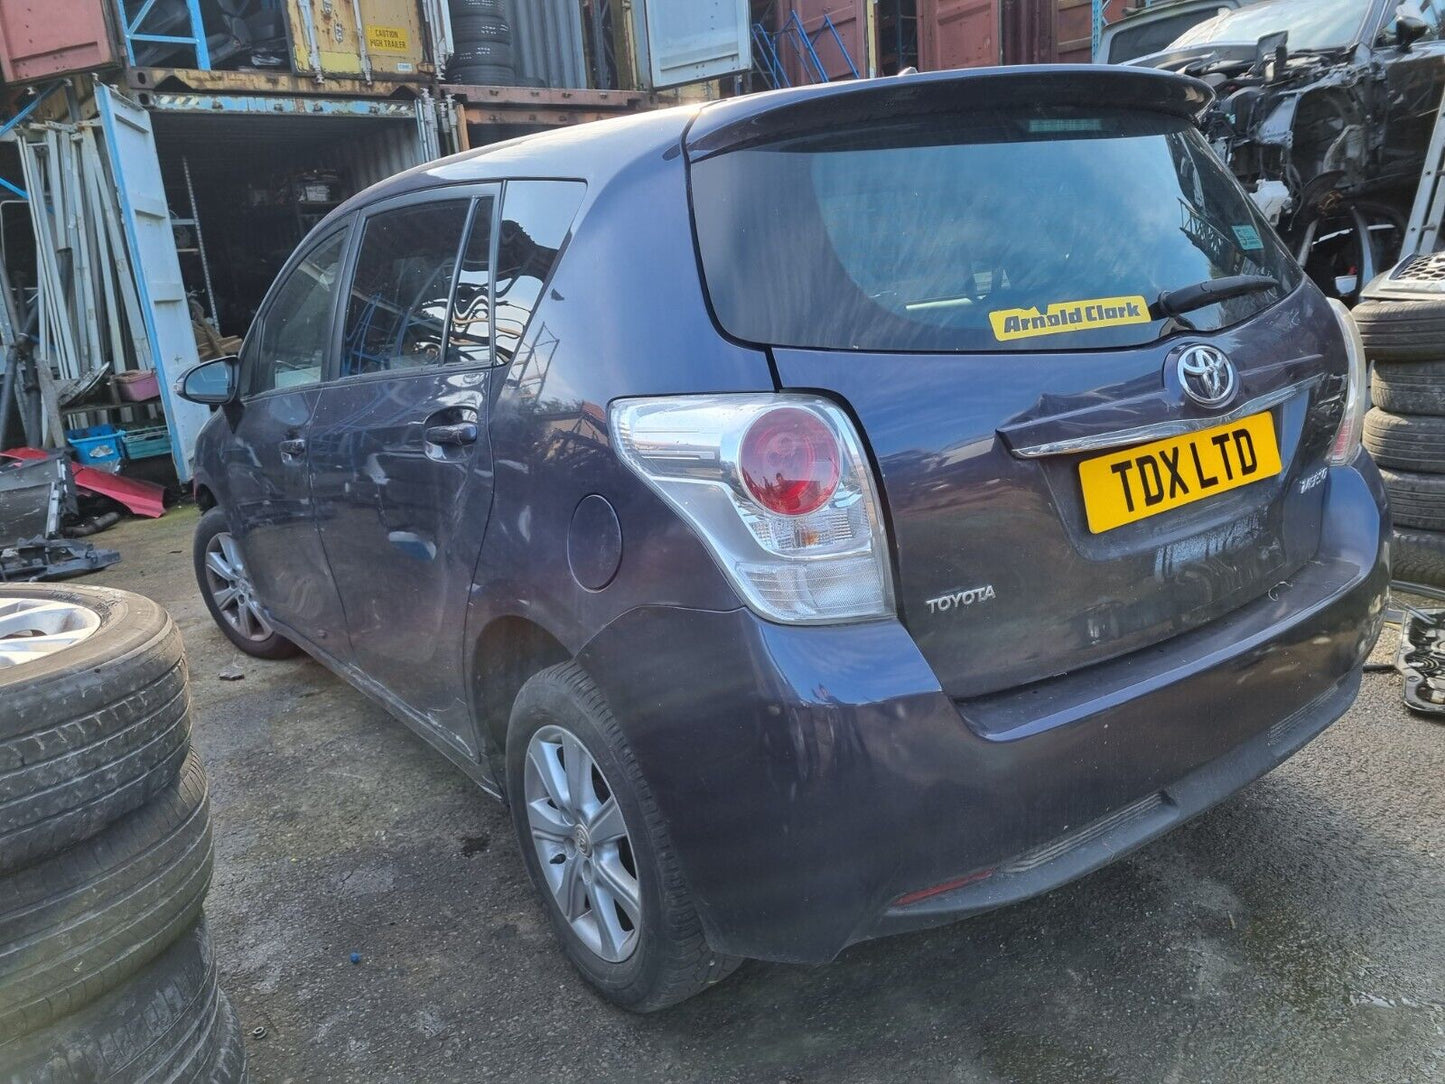 2016 TOYOTA VERSO ICON MK2 1.6 D-4D DIESEL 6 SPEED MANUAL FOR PARTS & SPARES